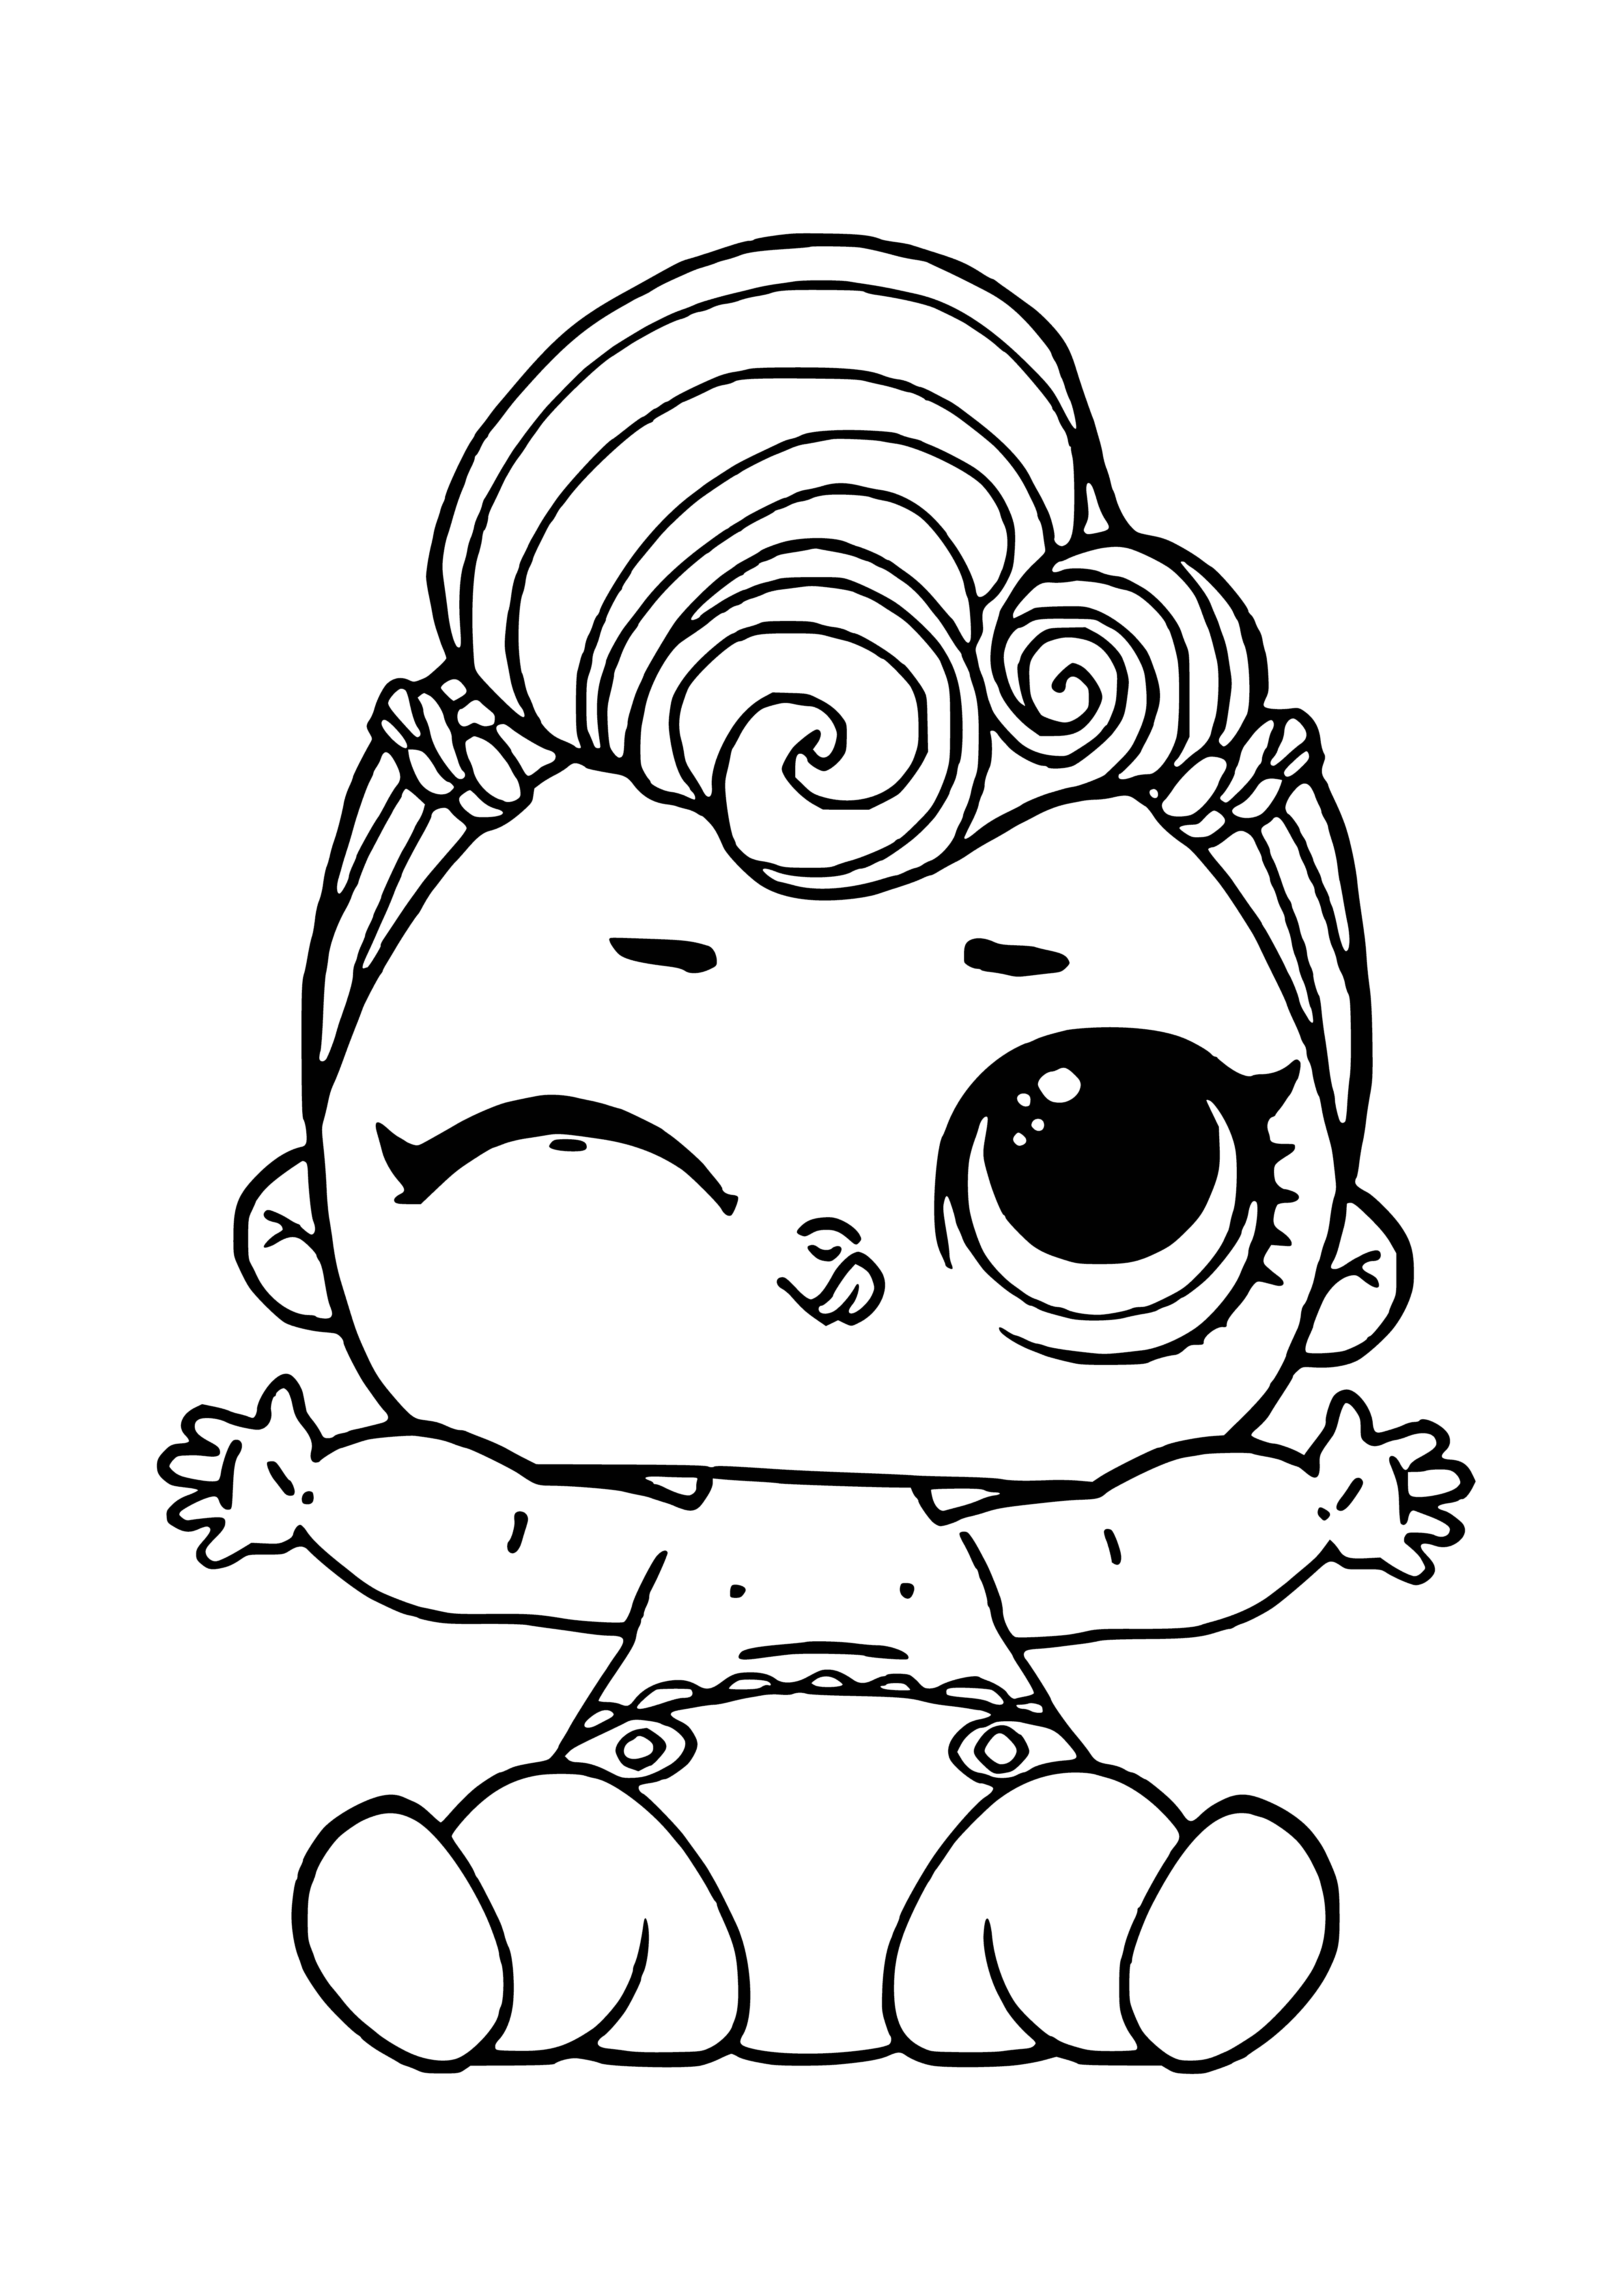 Lol baby grunge coloring page